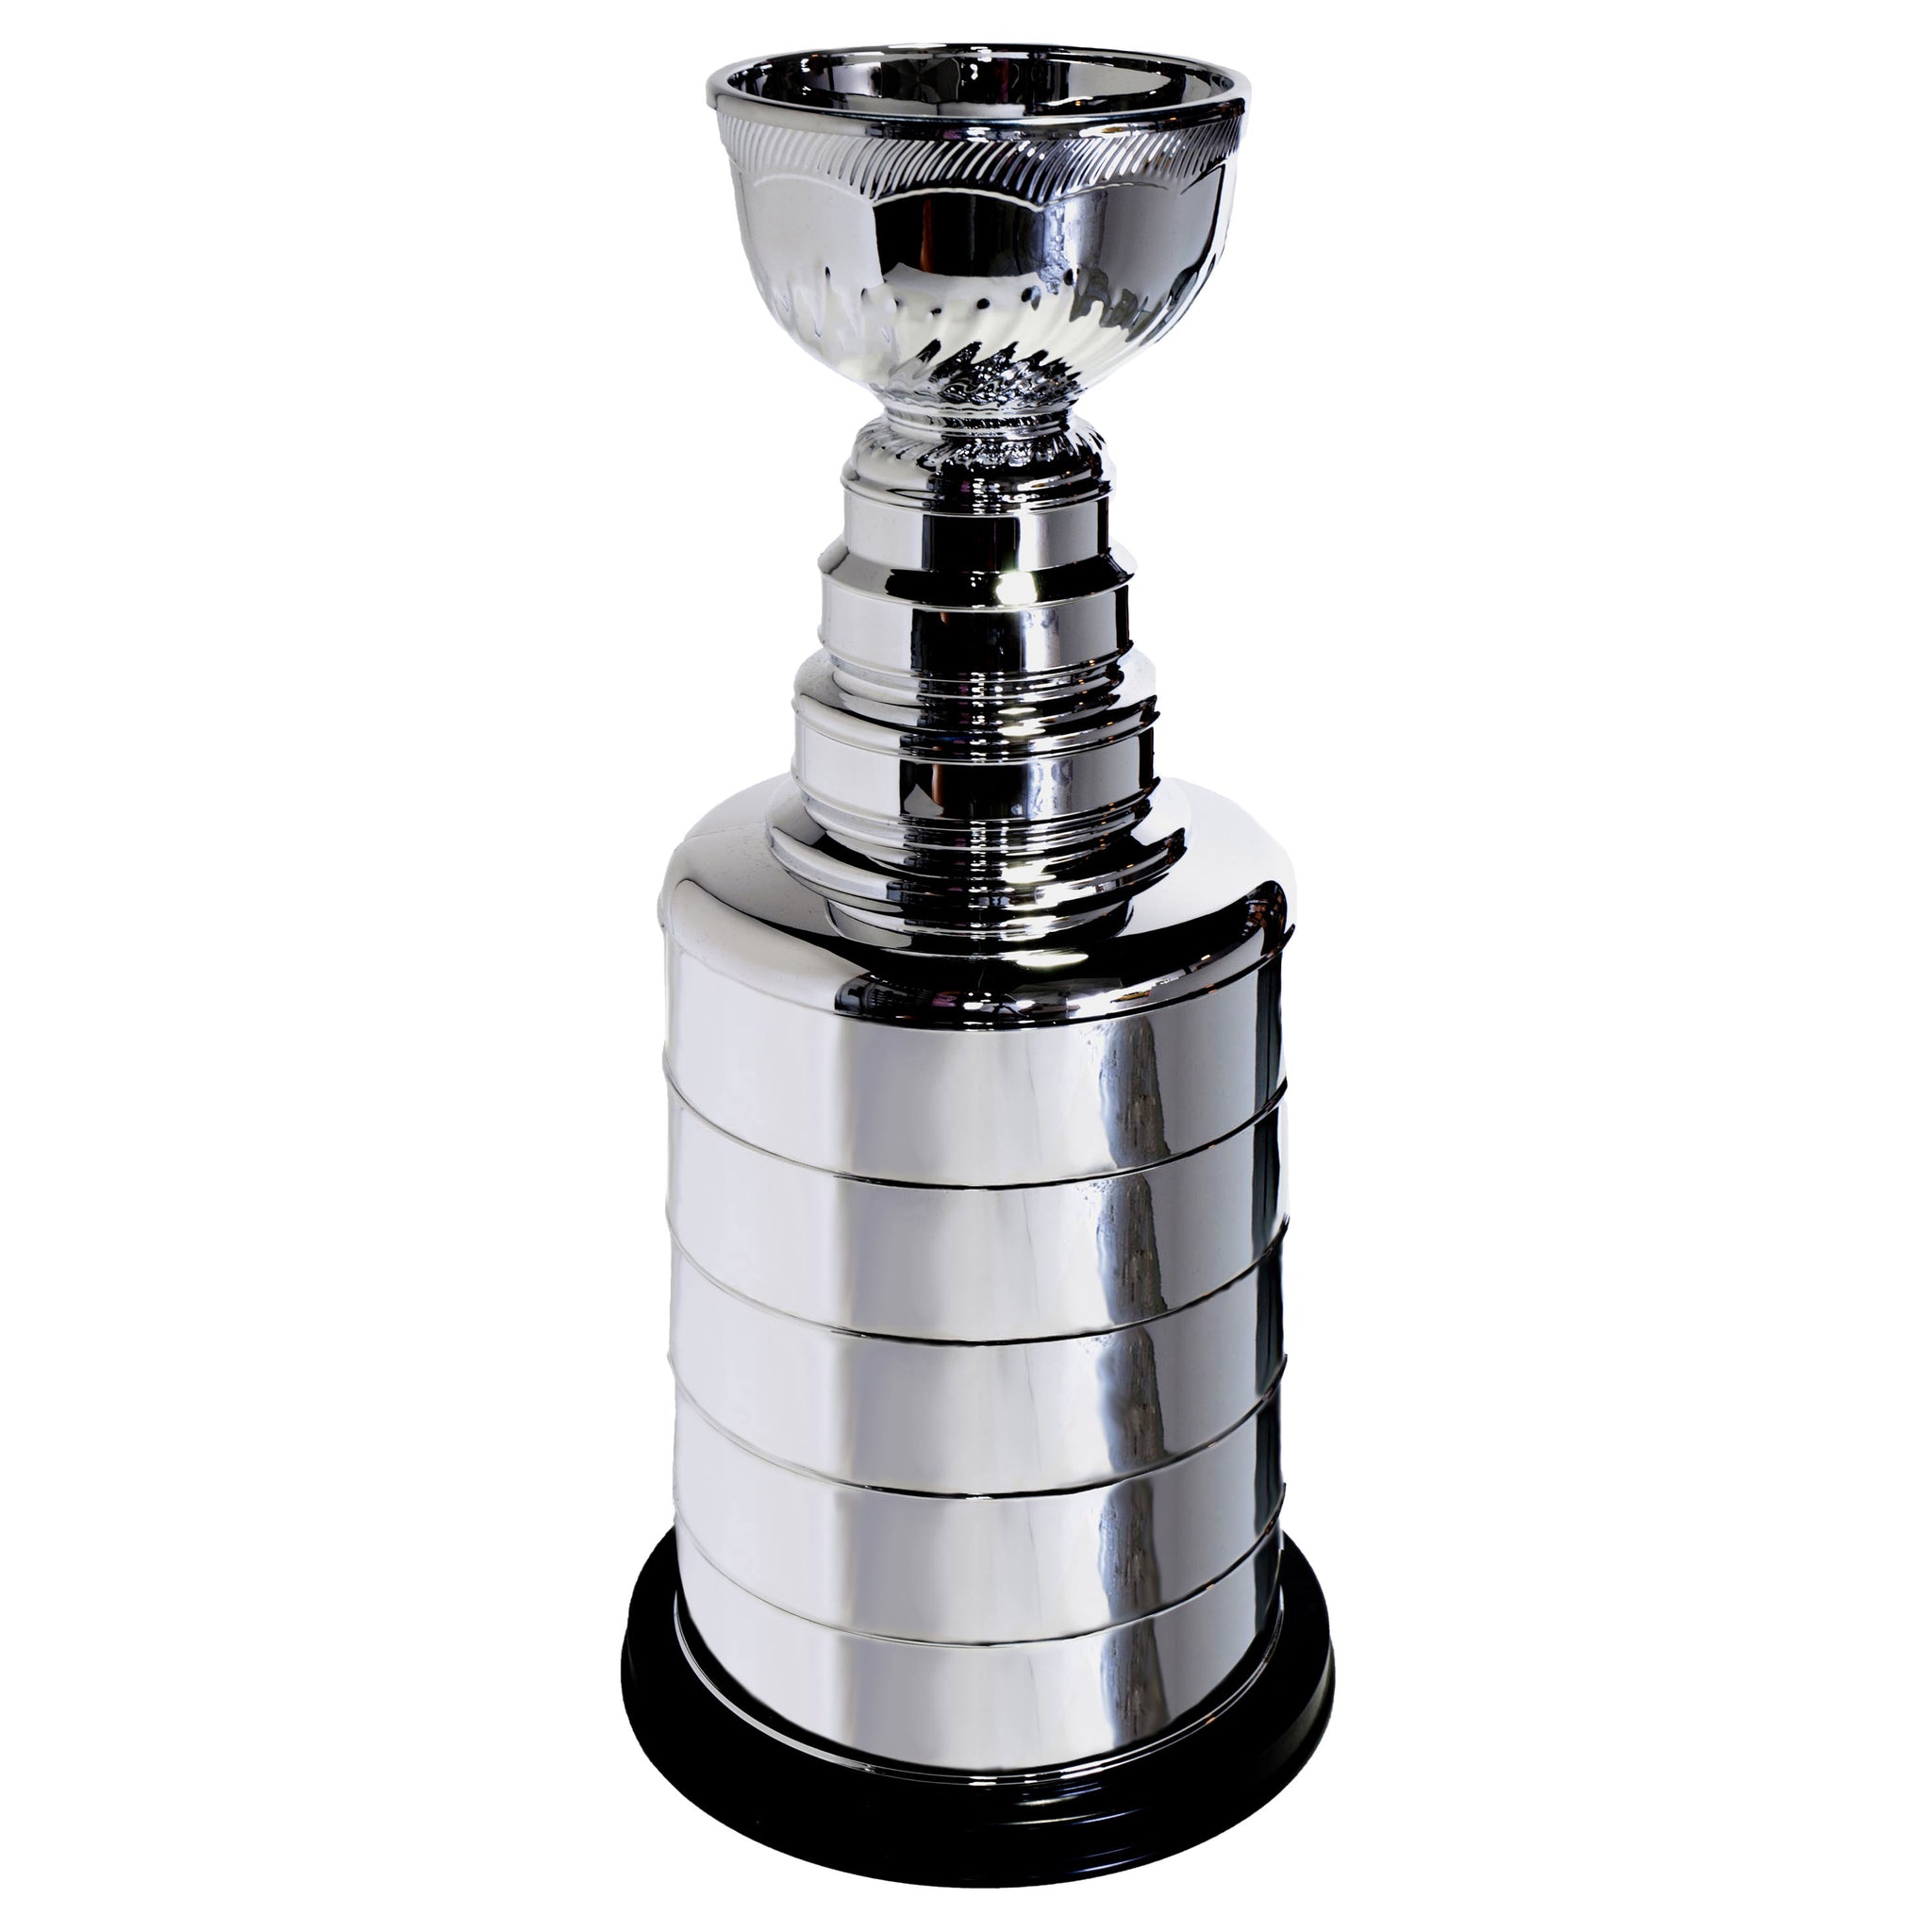 Stanley Cup Trophy Foam Core Cutout - Officially Licensed NHL Big Head